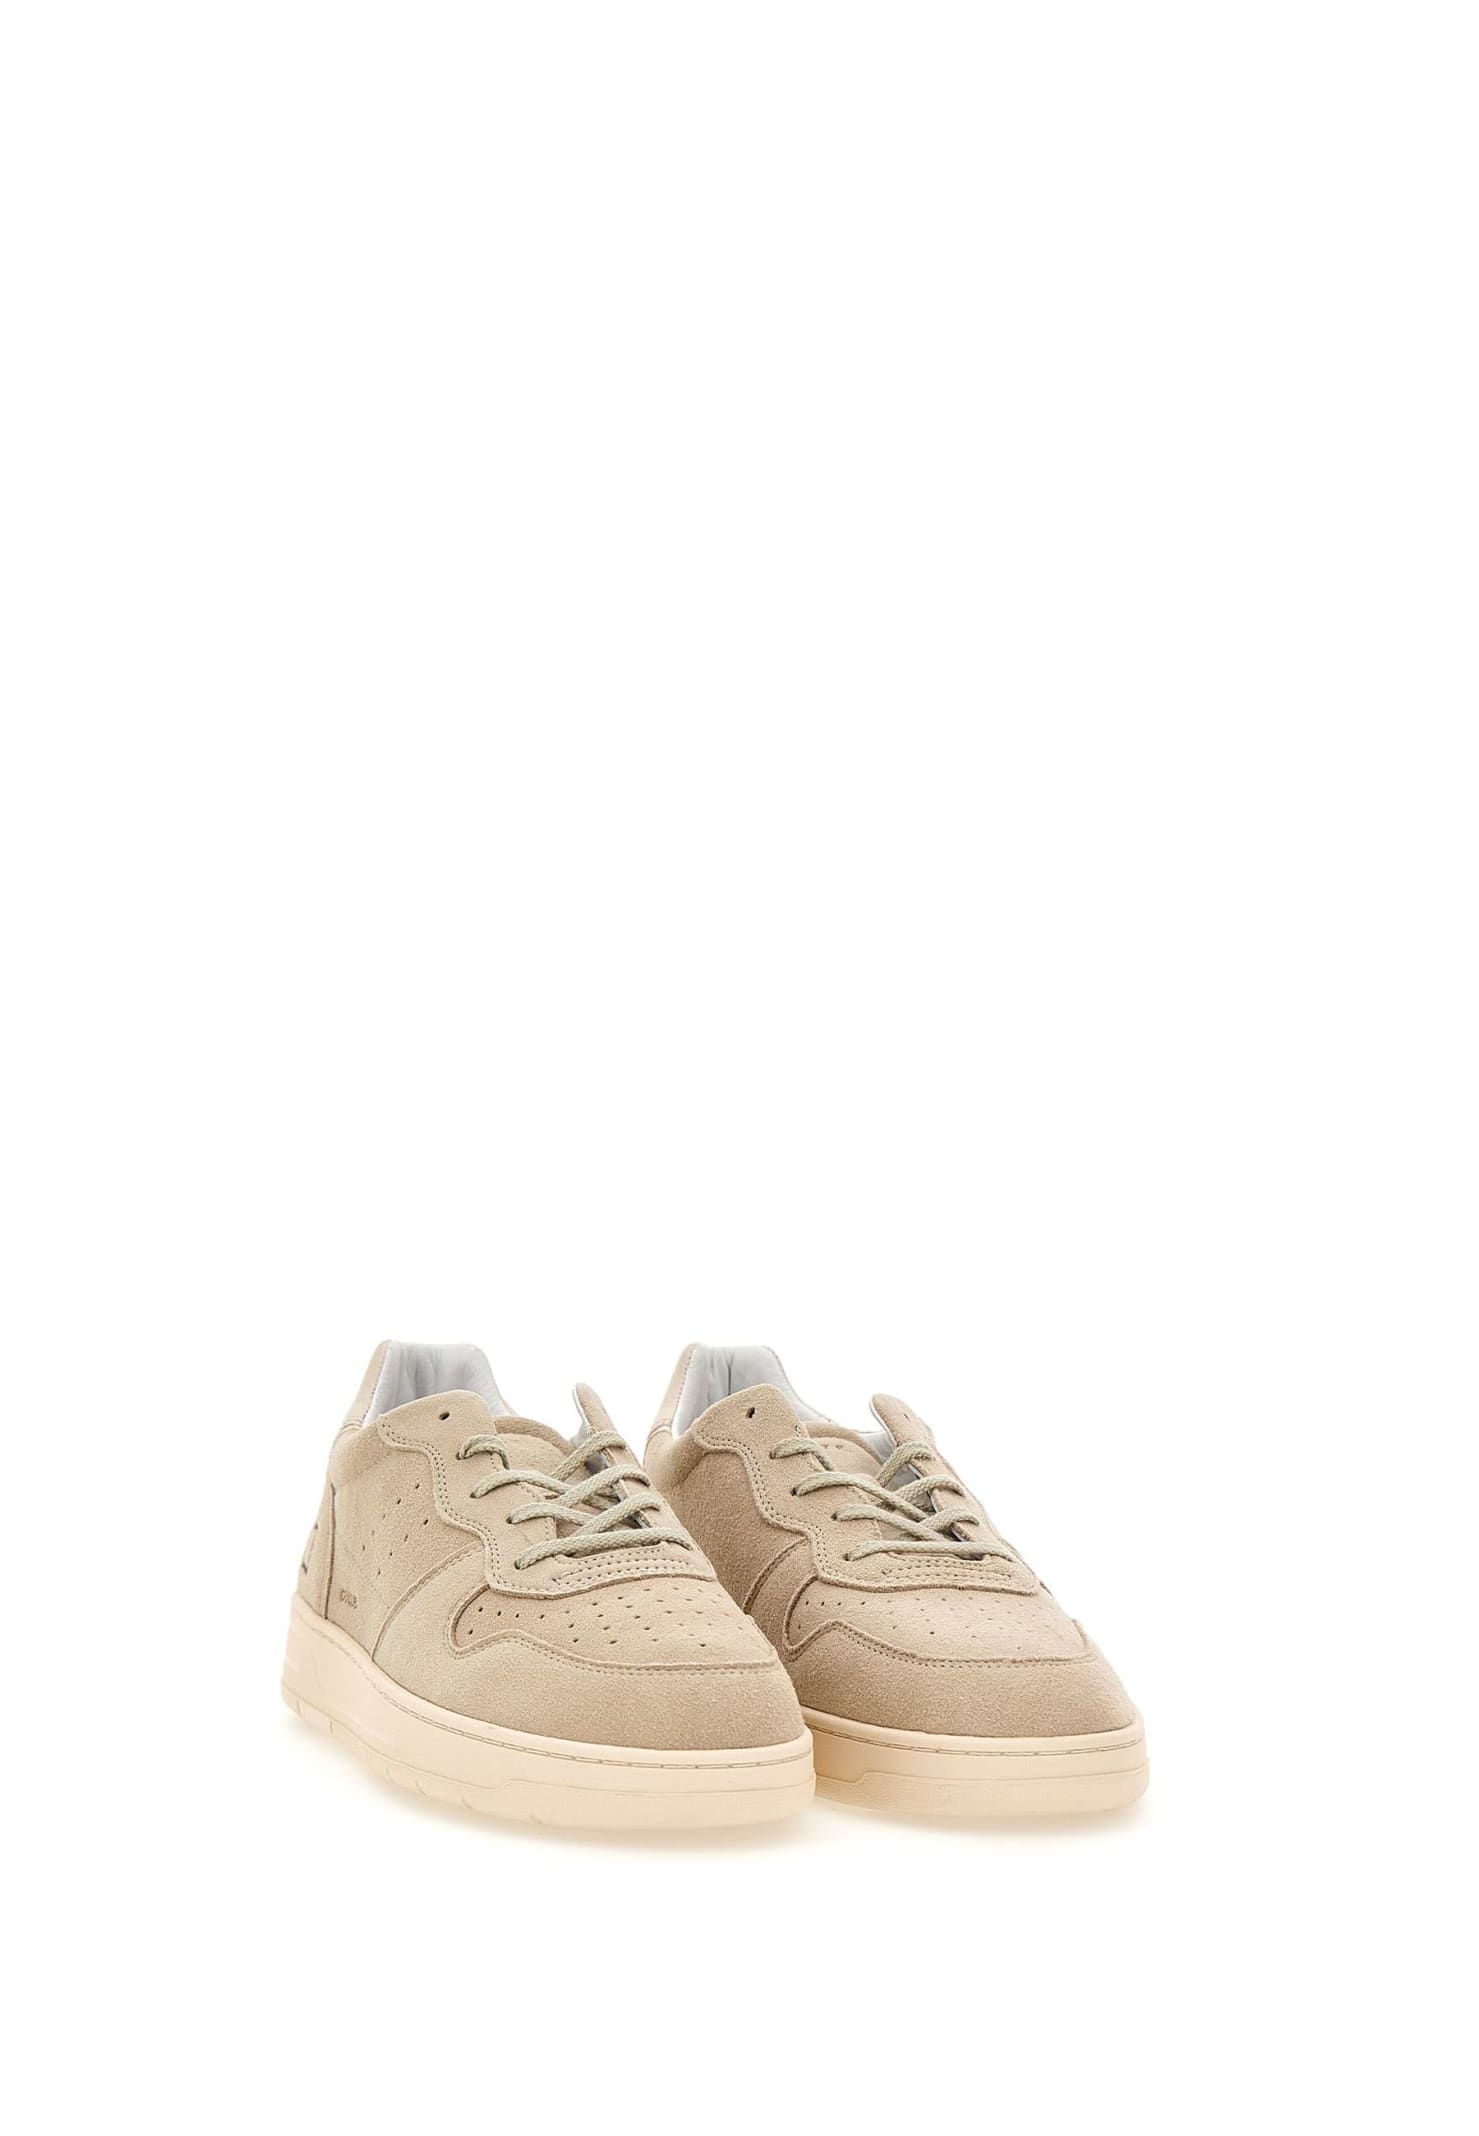 Shop Date Court 2.0 Colored Suede Sneakers In Beige